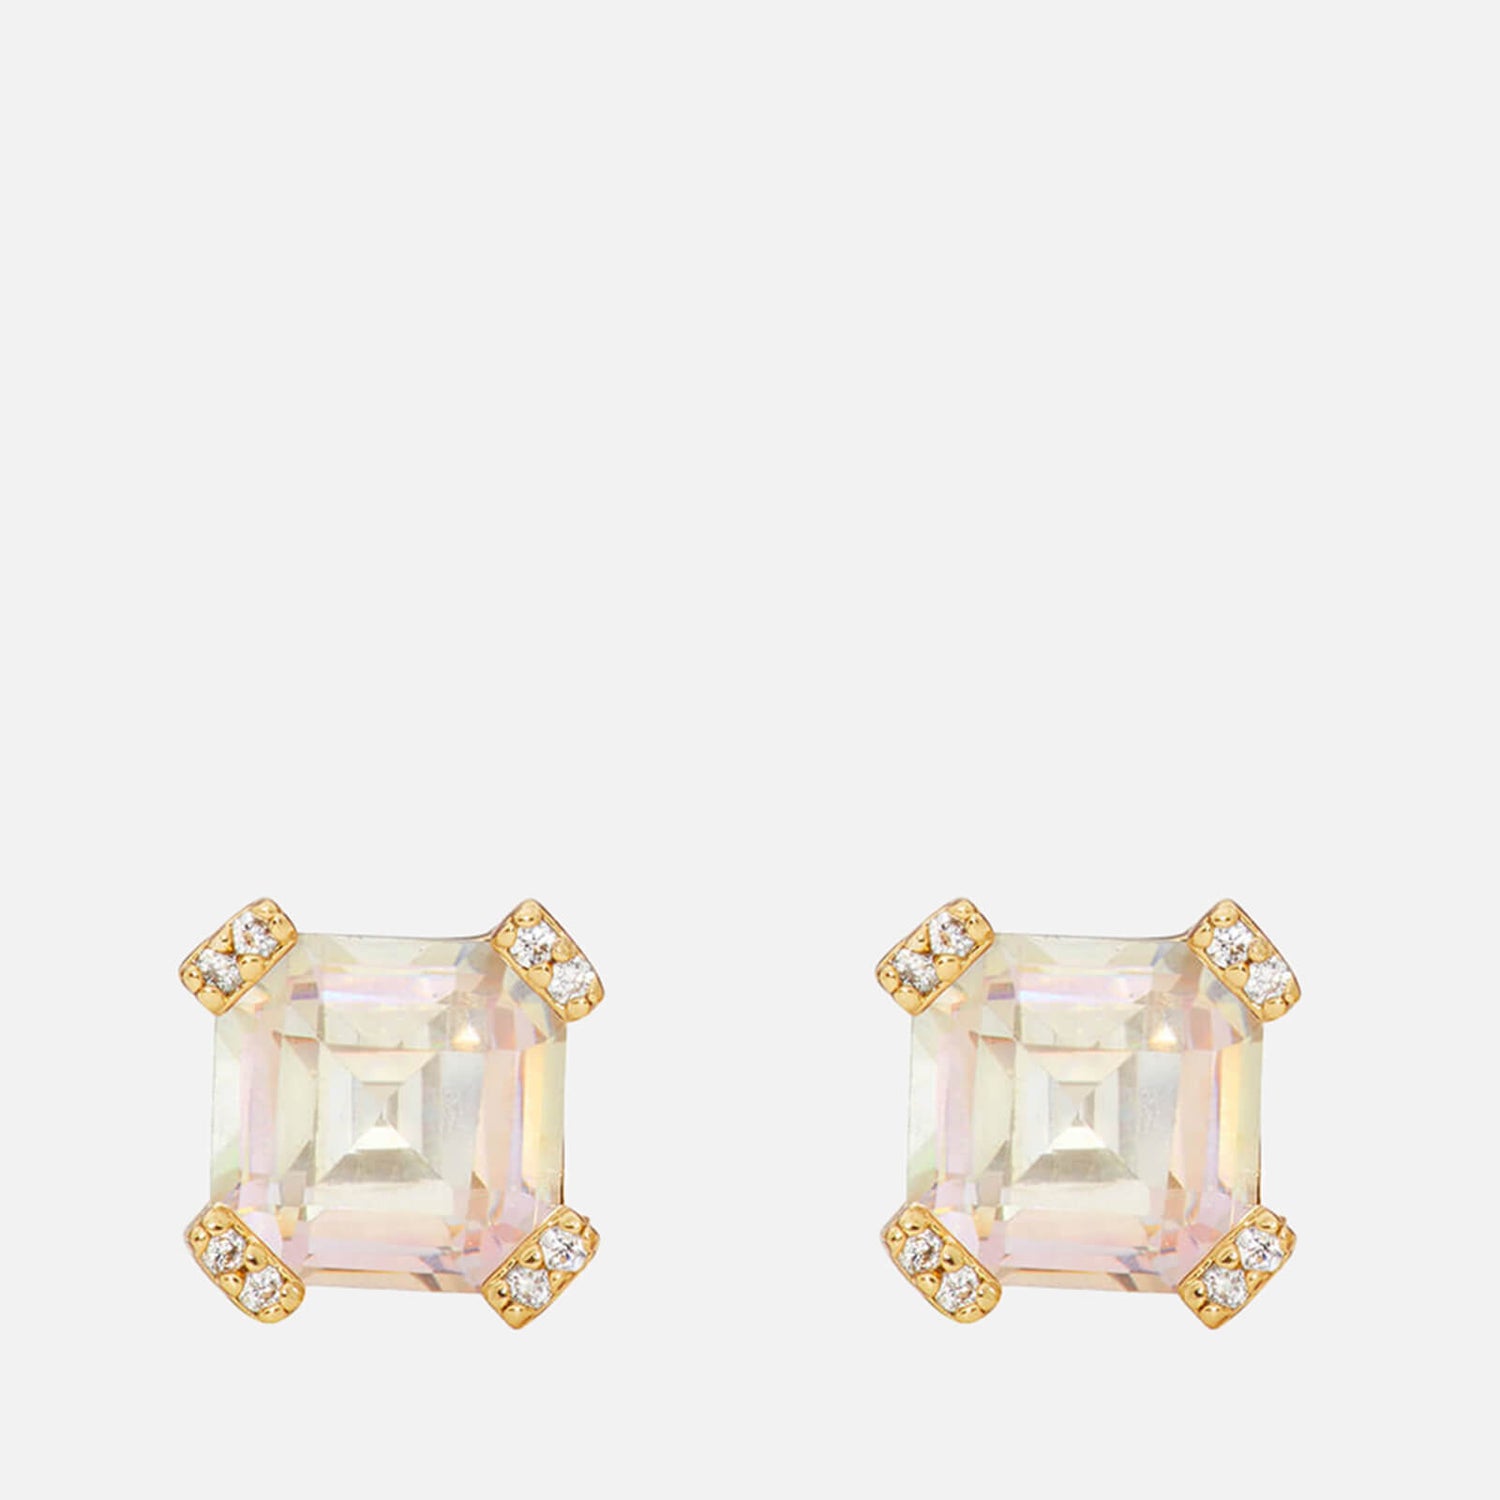 Kate Spade New York Gold-Tone and Crystal Earrings